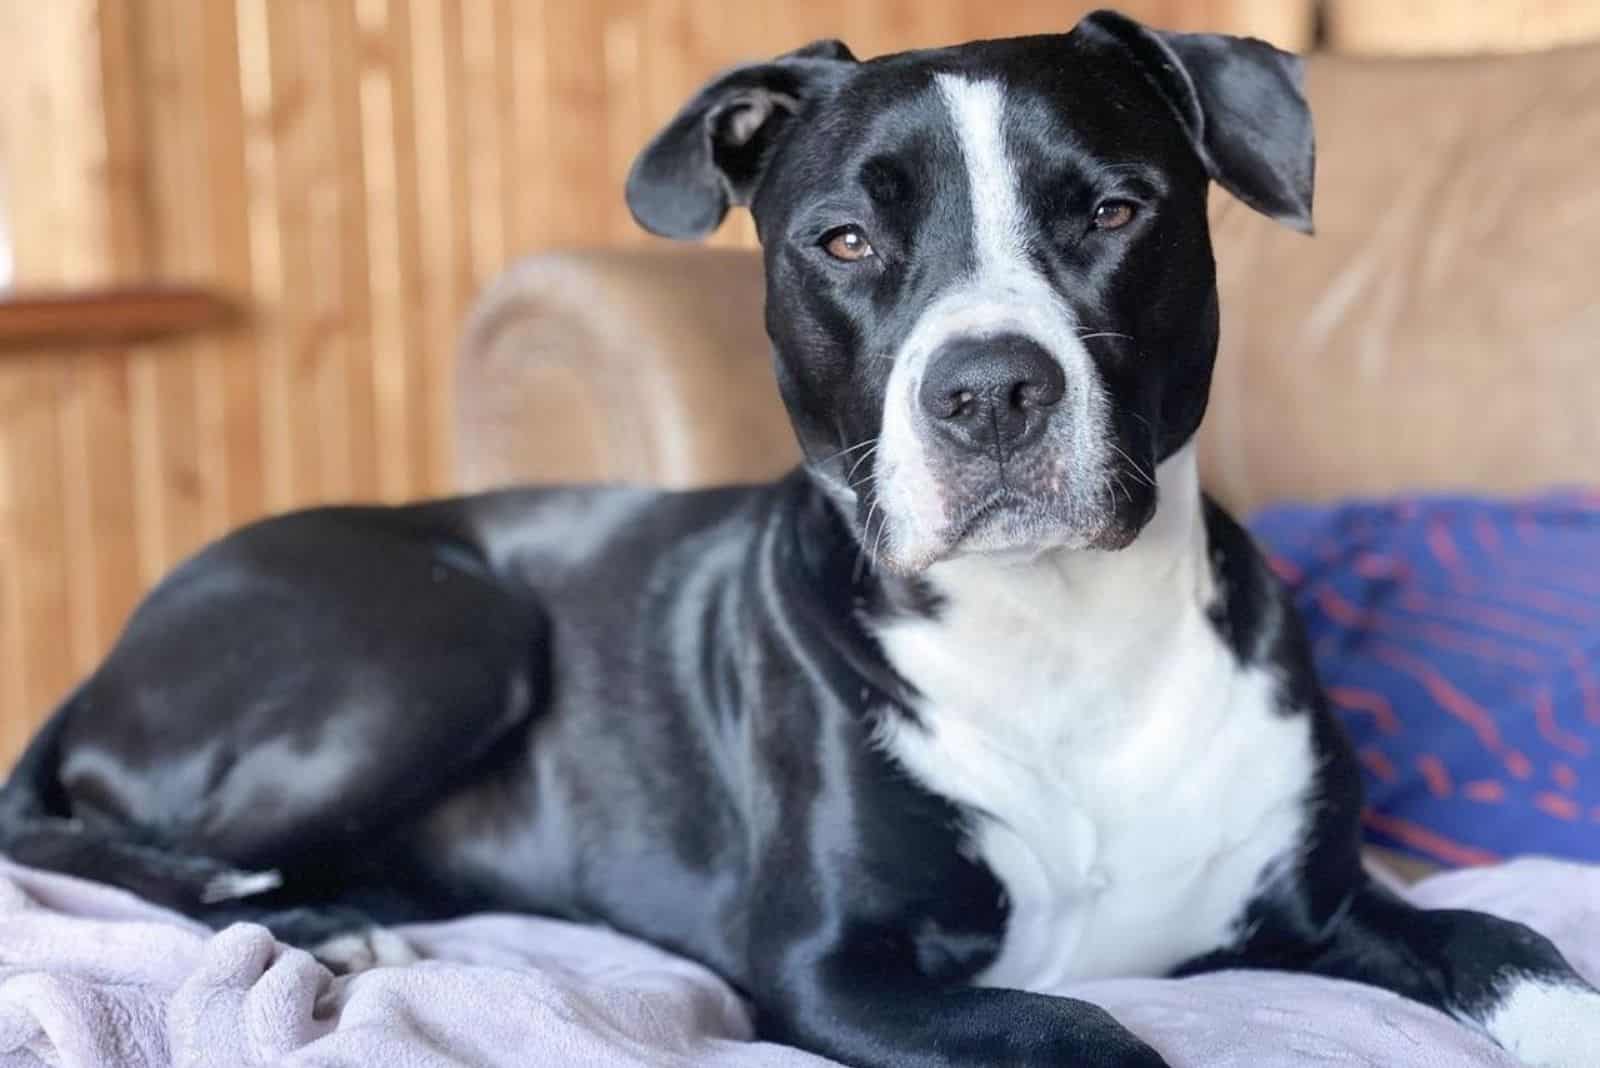 Black And White Pitbull: A Sweet Dog That Breaks Stereotypes